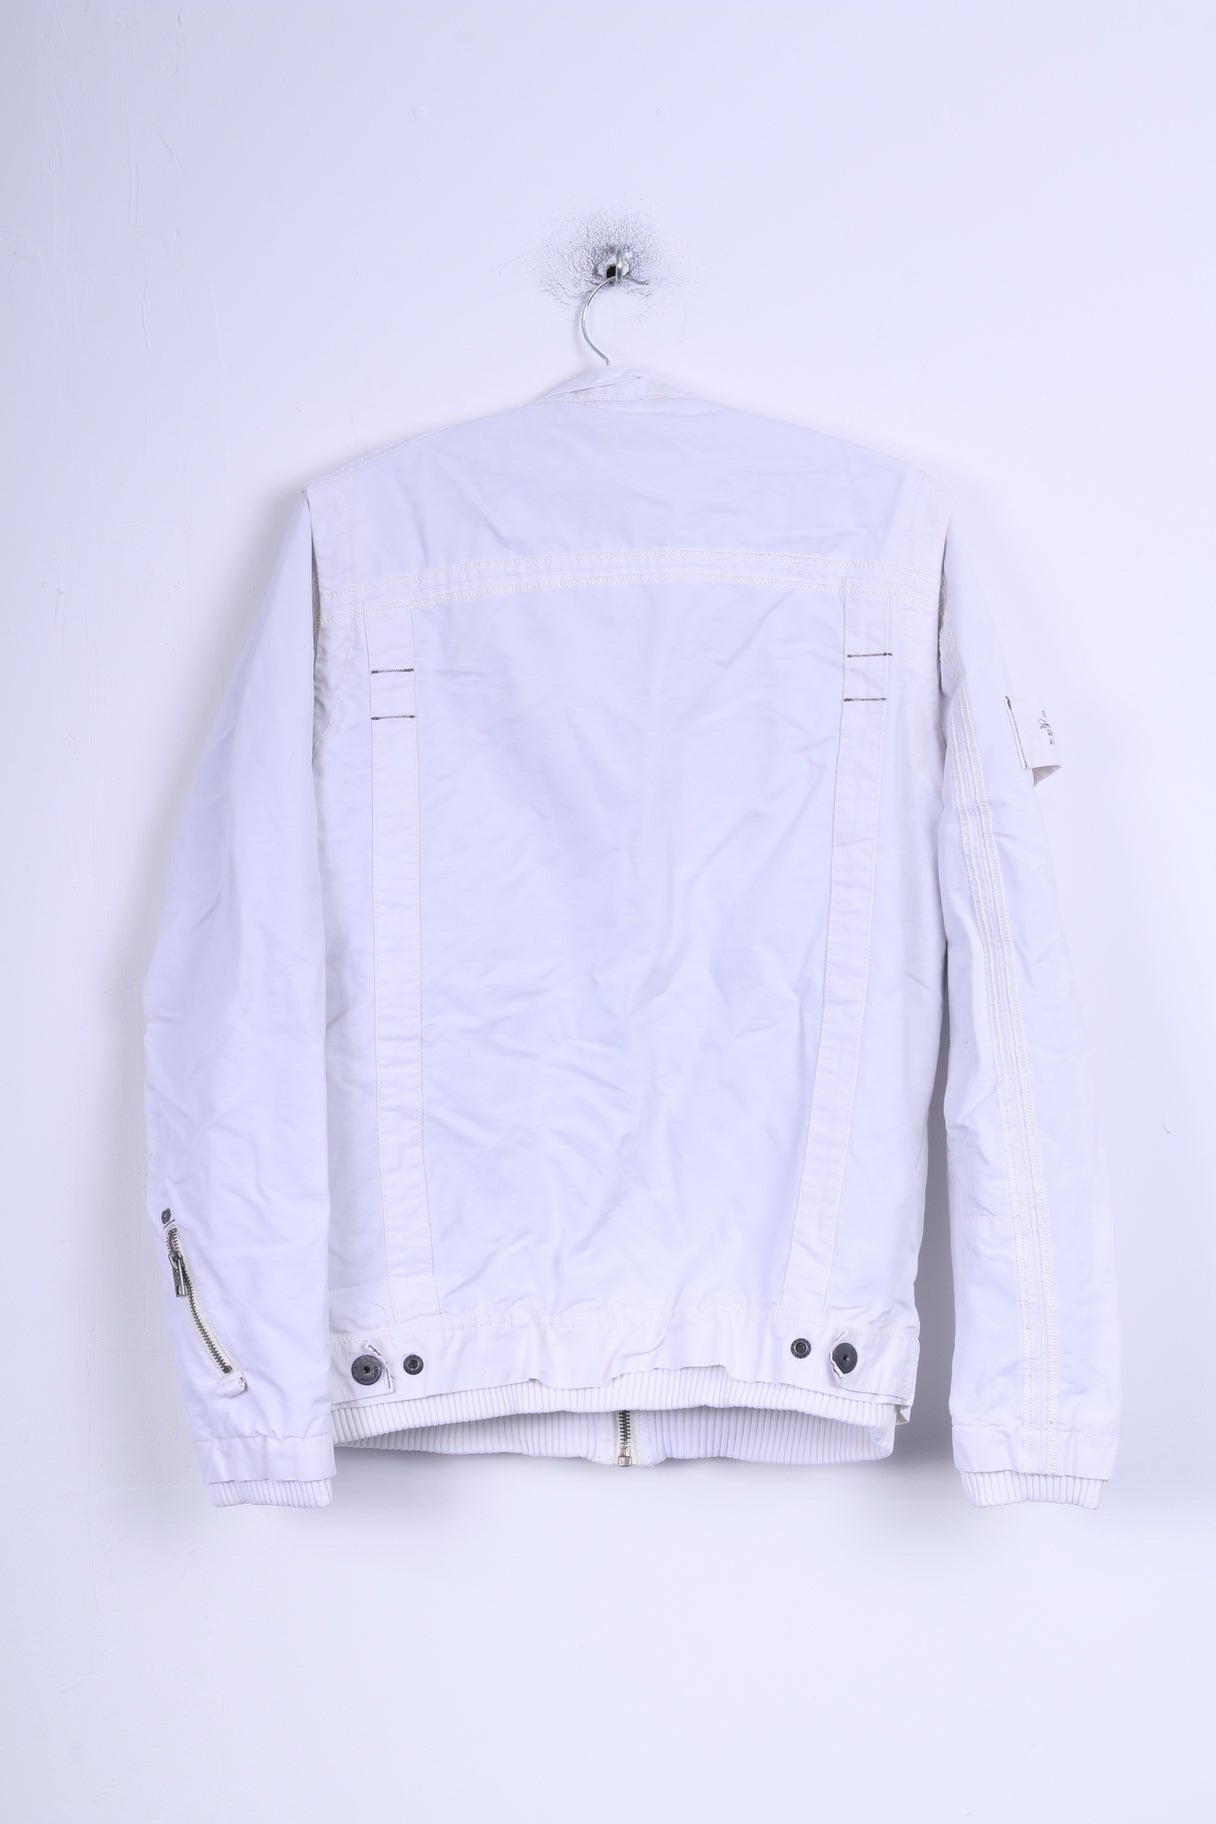 Jack & Jones Mens L Jacket White Cotton Zip Up Embroidered Casual Top